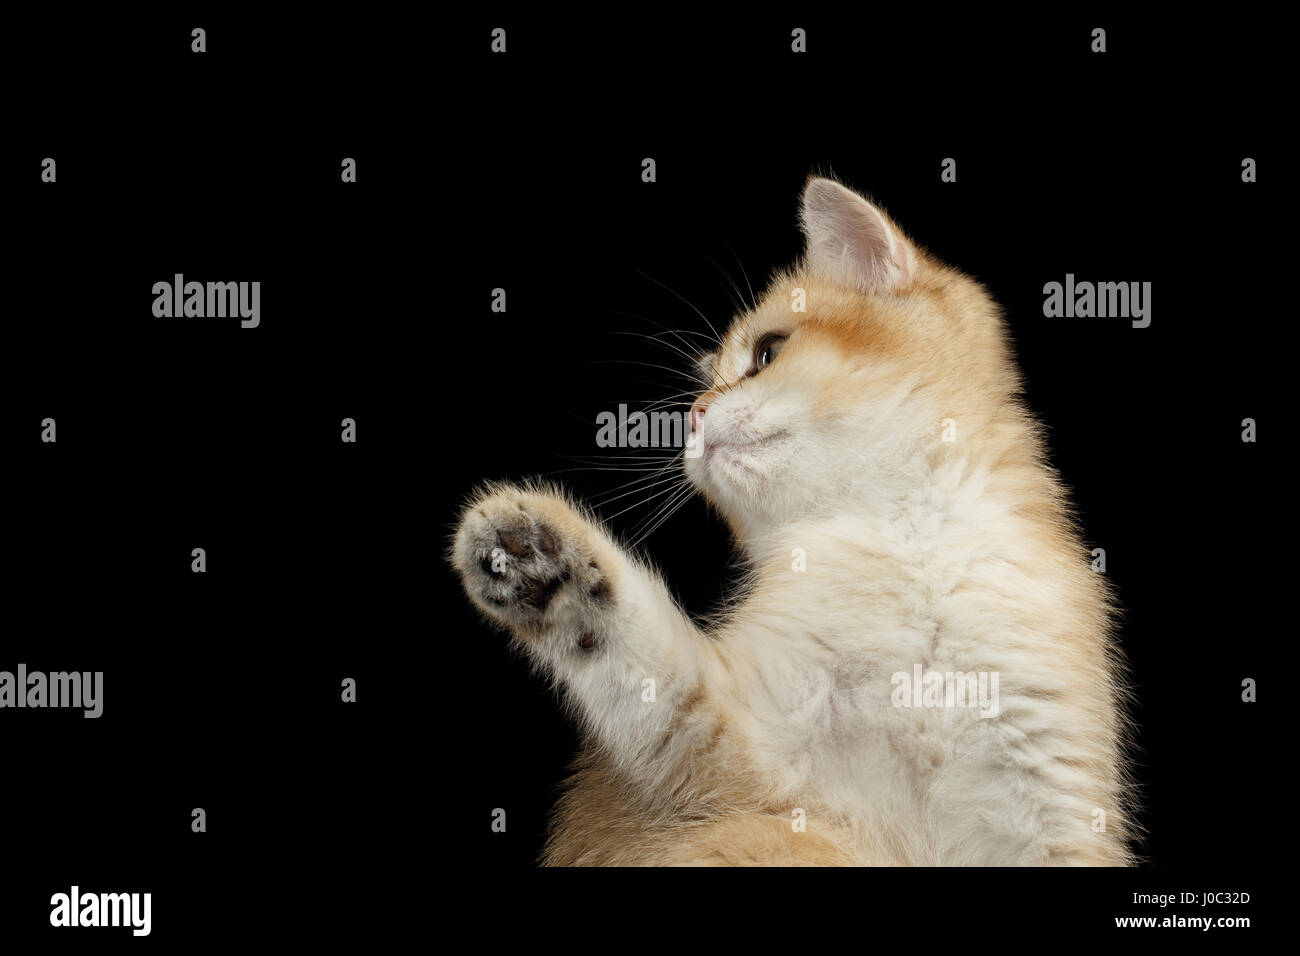 Close-up British Kitten Red Fur and Green eyes Plays with paw and Looks curious on Isolated Black Background, profile view Stock Photo